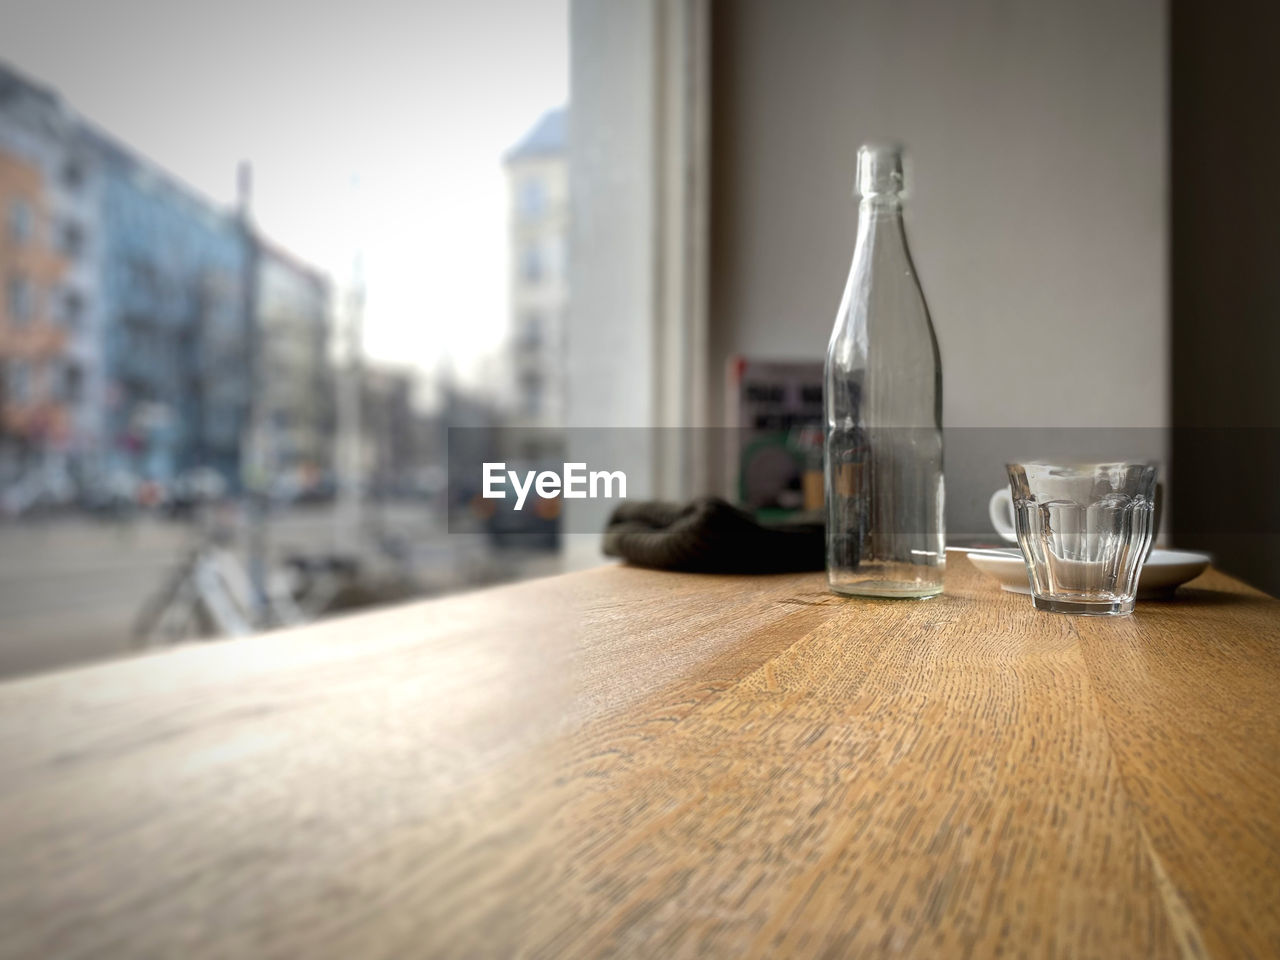 table, floor, flooring, drink, food and drink, glass, no people, drinking glass, refreshment, day, indoors, container, architecture, bottle, nature, wood, household equipment, business, window, absence, water, room, alcohol, focus on foreground, city, empty, surface level